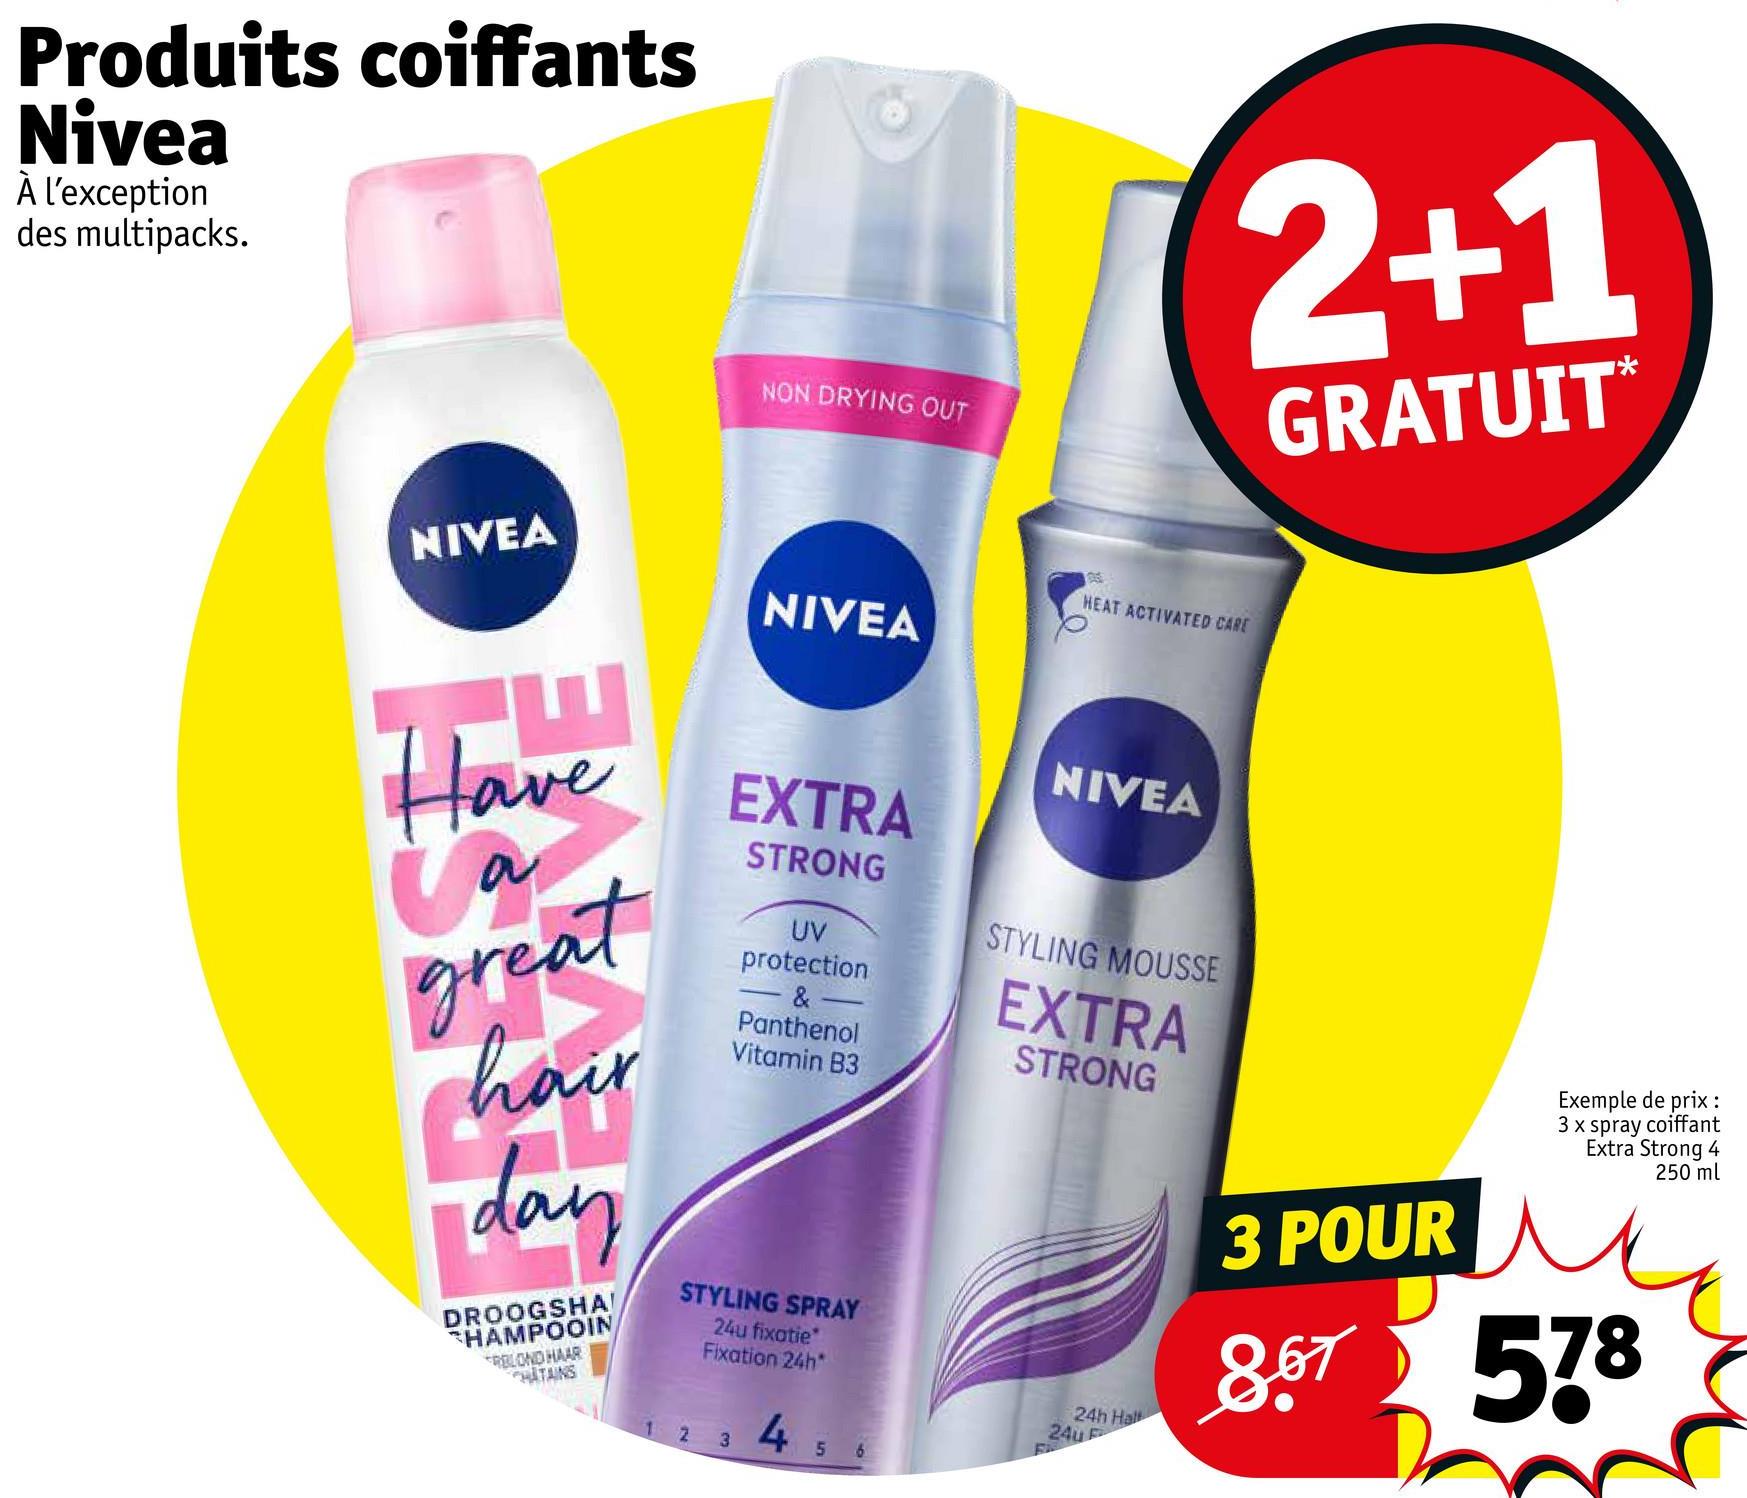 Produits coiffants
Nivea
À l'exception
des multipacks.
NIVEA
Have
a
great
hair
day
DROOGSHA!
HAMPOOIN
RBLOND HAAR
CHATAINS
2
NON DRYING OUT
NIVEA
EXTRA
STRONG
3
STYLING SPRAY
24u fixatie
Fixation 24h*
UV
protection
&
Panthenol
Vitamin B3
4
5 6
HEAT ACTIVATED CARE
NIVEA
F
STYLING MOUSSE
EXTRA
STRONG
2+1
GRATUIT*
24h Hall
24u F
Exemple de prix :
3 x spray coiffant
Extra Strong 4
250 ml
3 POUR
8.67 578